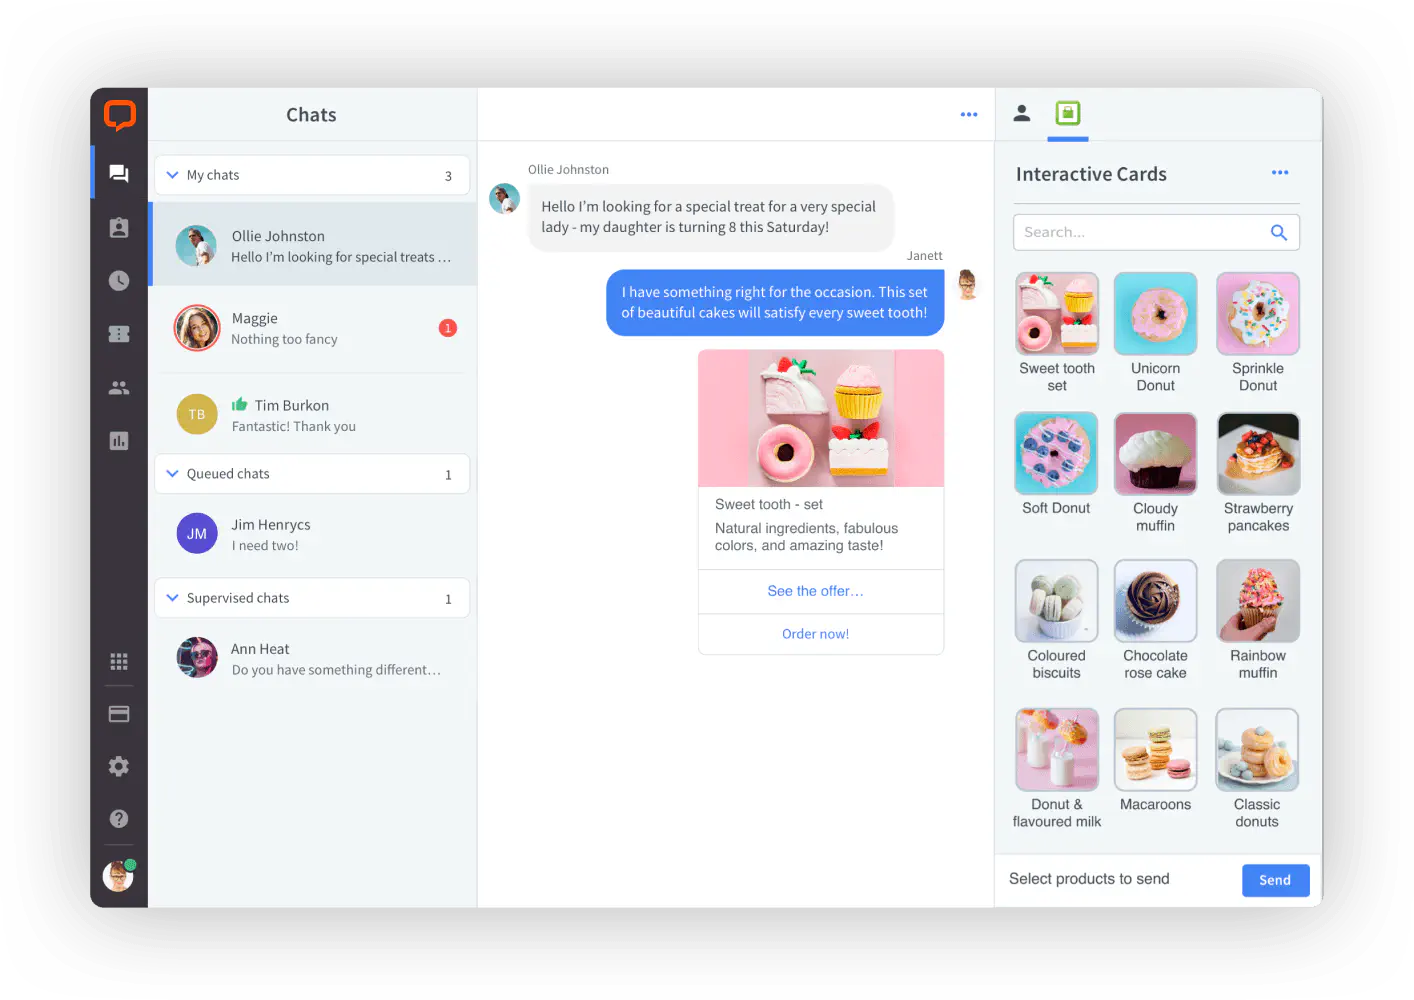 Customer service app by LiveChat